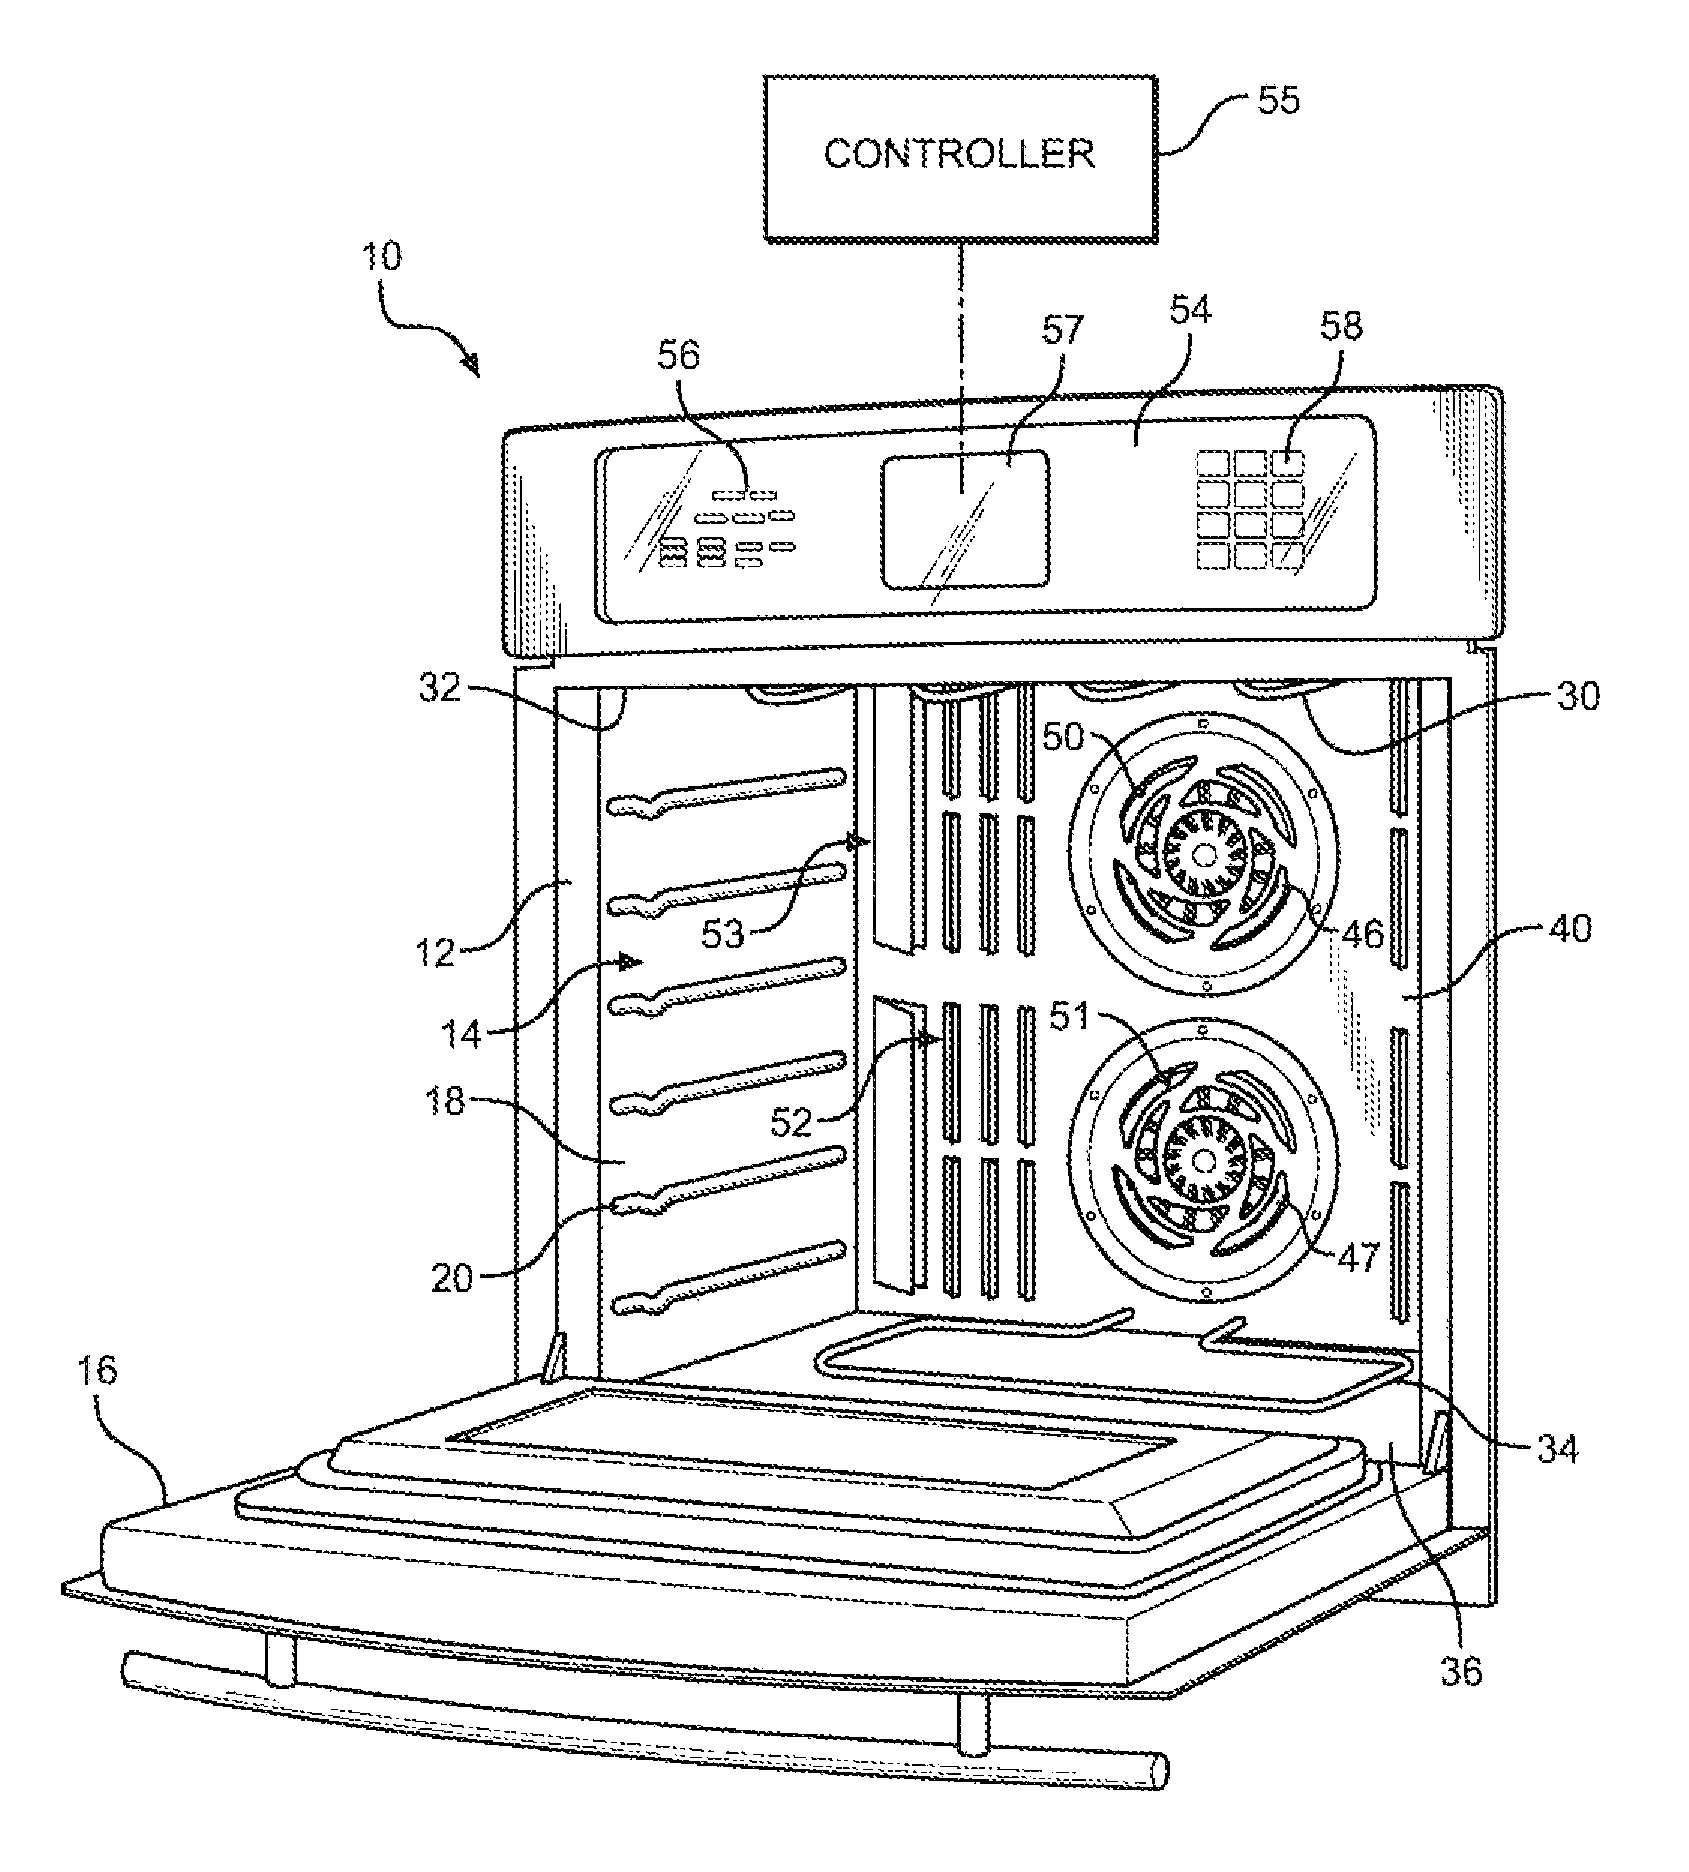 Priority controlled multi-fan convection oven